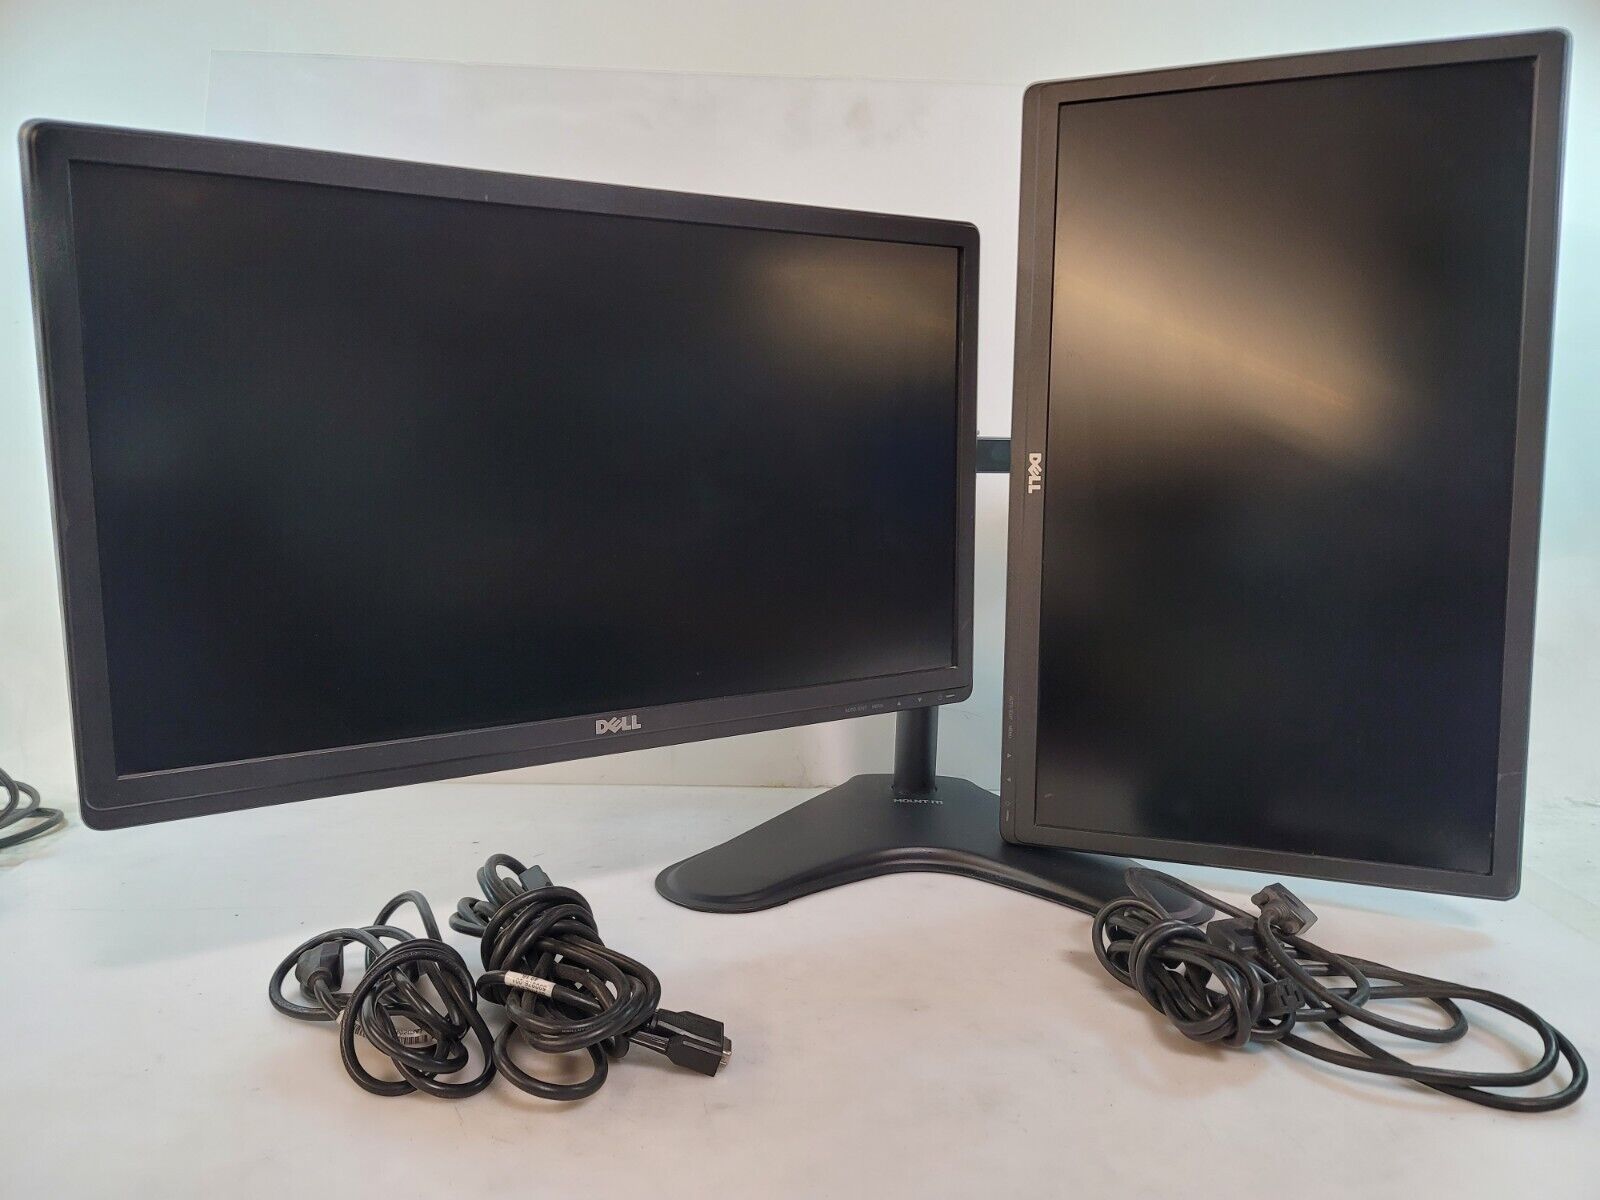 2x Dual Dell 24inch Business 1080p Gaming MonitorS W/ Dual Stand +Cables (Grd A)